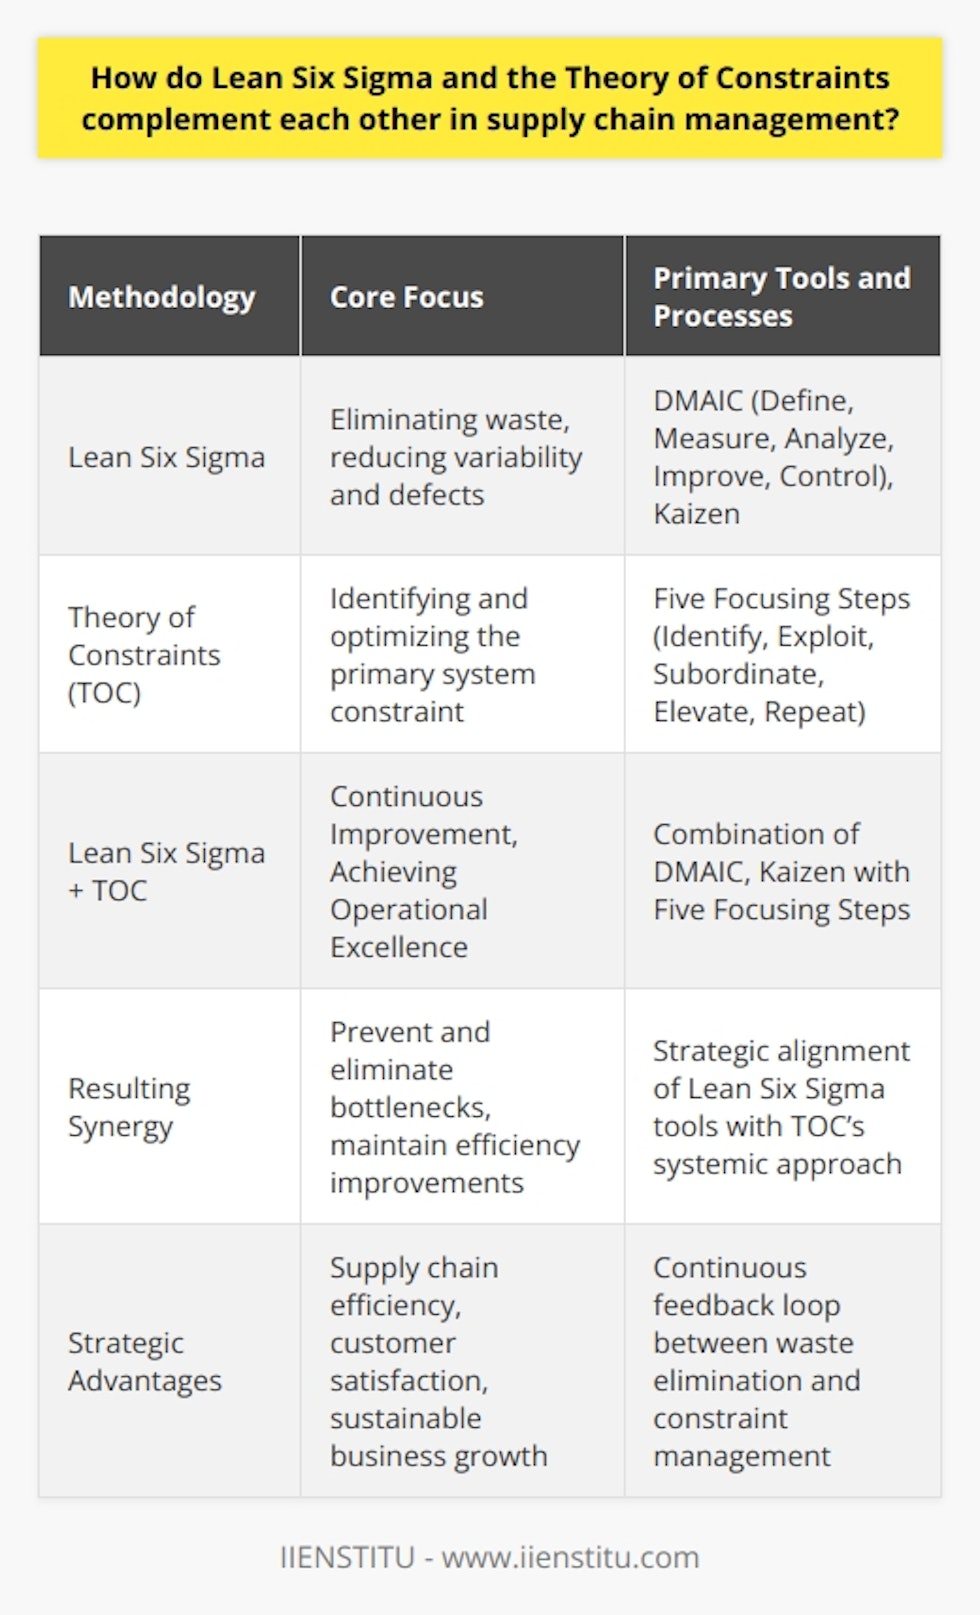 In the evolving landscape of supply chain management, combining Lean Six Sigma and the Theory of Constraints (TOC) offers a strategic advantage by targeting inefficiencies from multiple angles. This integrated approach allows organizations to optimize their operations by leveraging the strengths of both methodologies.Lean Six Sigma is an intricate approach that weaves together Lean principles focused on eliminating waste and Six Sigma which zeroes in on reducing variability and defects. Applied to supply chain processes, Lean Six Sigma's comprehensive toolkit – which includes DMAIC (Define, Measure, Analyze, Improve, Control) for problem-solving and Kaizen for continuous improvement – helps firms streamline operations, elevating quality and efficiency. It’s fundamentally about making the supply chain run smoother and faster by cutting out unnecessary steps and ensuring quality is built into the processes.On the other side of the spectrum, TOC postulates that every dynamic system, including supply chains, is limited in achieving more of its goals by a very small number of constraints. TOC's process begins with identifying the primary constraint within the system that prevents it from reaching higher levels of performance. Once identified, the organization concentrates efforts on managing and optimizing this constraint to enhance system productivity. The ultimate goal is to create a balanced flow, aligning all operations to the pace set by this constraint, referred to as the system's 'drumbeat.'When Lean Six Sigma and TOC converge, supply chain management can be transformed substantially. Lean Six Sigma complements TOC by providing tools for root cause analysis around constraints and facilitates continuous improvement even after the constraint has been elevated. In fact, while TOC focuses the organization on addressing the 'weakest link,' Lean Six Sigma helps maintain the gains by promoting a consistent culture of efficiency and quality.Additionally, this synergy can benefit organizations by providing a more holistic perspective. TOC can highlight where Lean Six Sigma projects should be concentrated for maximum impact. Conversely, Lean Six Sigma’s focus on waste reduction and process improvement plays a critical role in ensuring that once a bottleneck from TOC’s identification is removed or managed, no new inefficiencies are introduced elsewhere in the supply chain.By employing both Lean Six Sigma and TOC, companies can develop a dynamic and responsive supply chain that not only meets current demands effectively but also possesses the agility to adapt to future changes. This approach does not only improve metrics and operational effectiveness but also aligns closely with strategic objectives, leading to improved customer satisfaction and sustainable business growth.In summary, Lean Six Sigma's waste-eliminating tools paired with TOC's focused improvement on bottlenecks can lead to unprecedented levels of supply chain efficiency and effectiveness. Together, they provide a robust framework for achieving operational excellence and strategic competitive advantage in a complex and demanding market landscape.